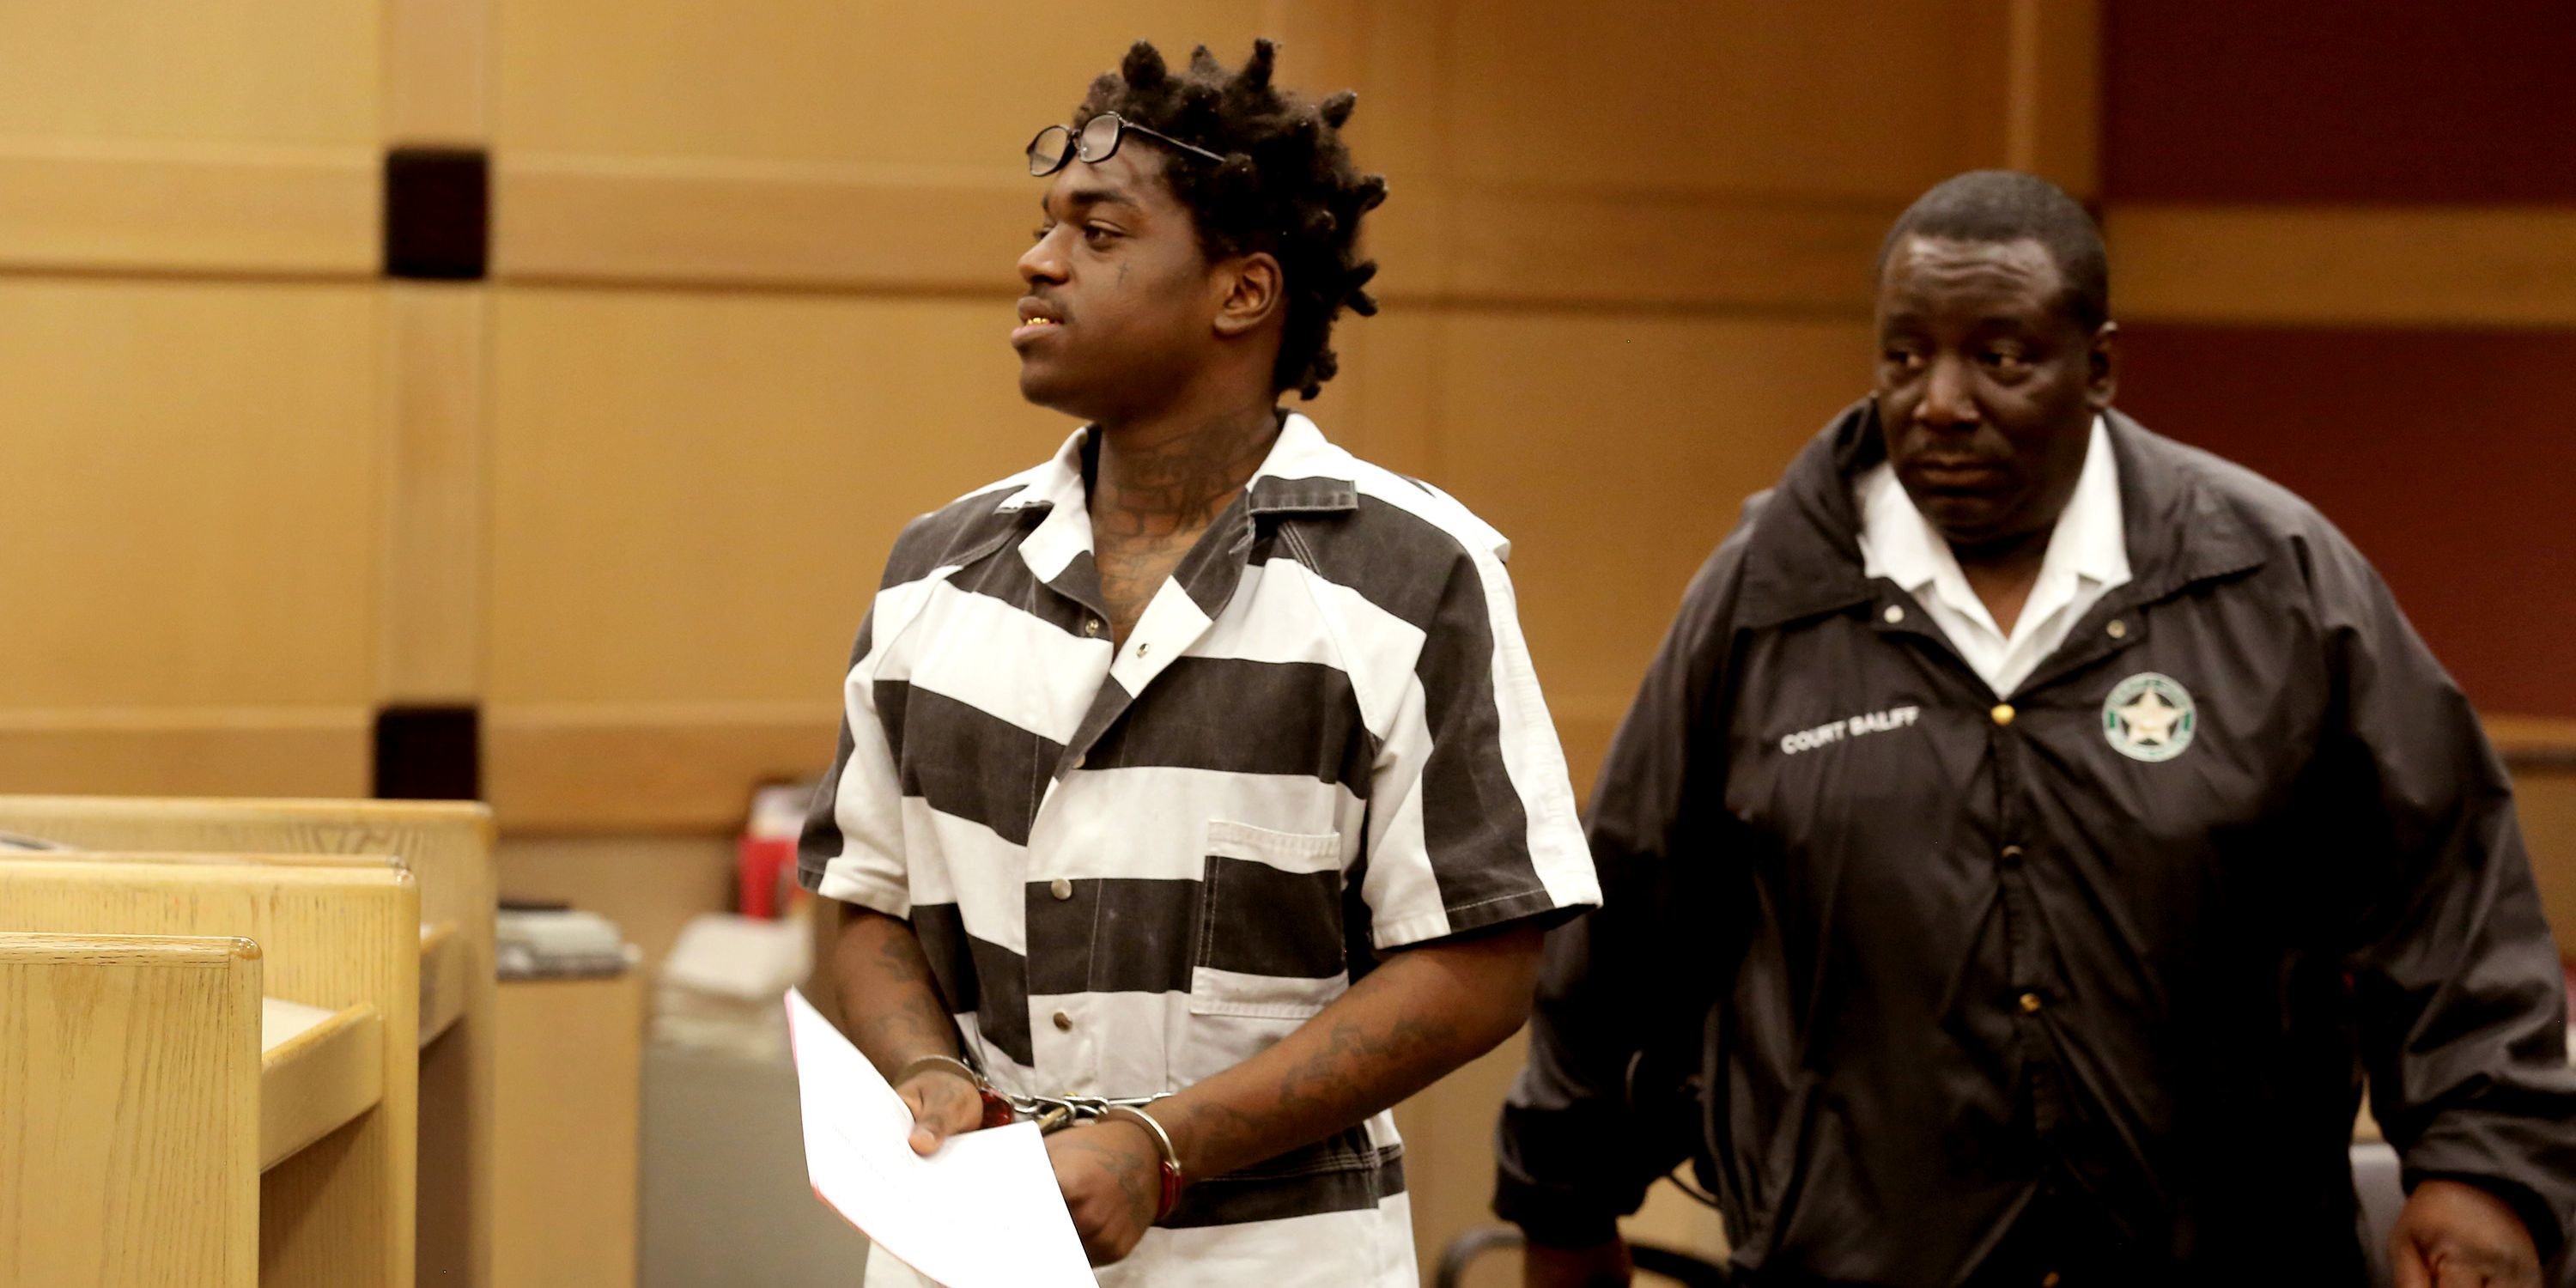 3000x1500 Kodak Black Was Released From Jail in Florida, But Isn't a Free Man Yet